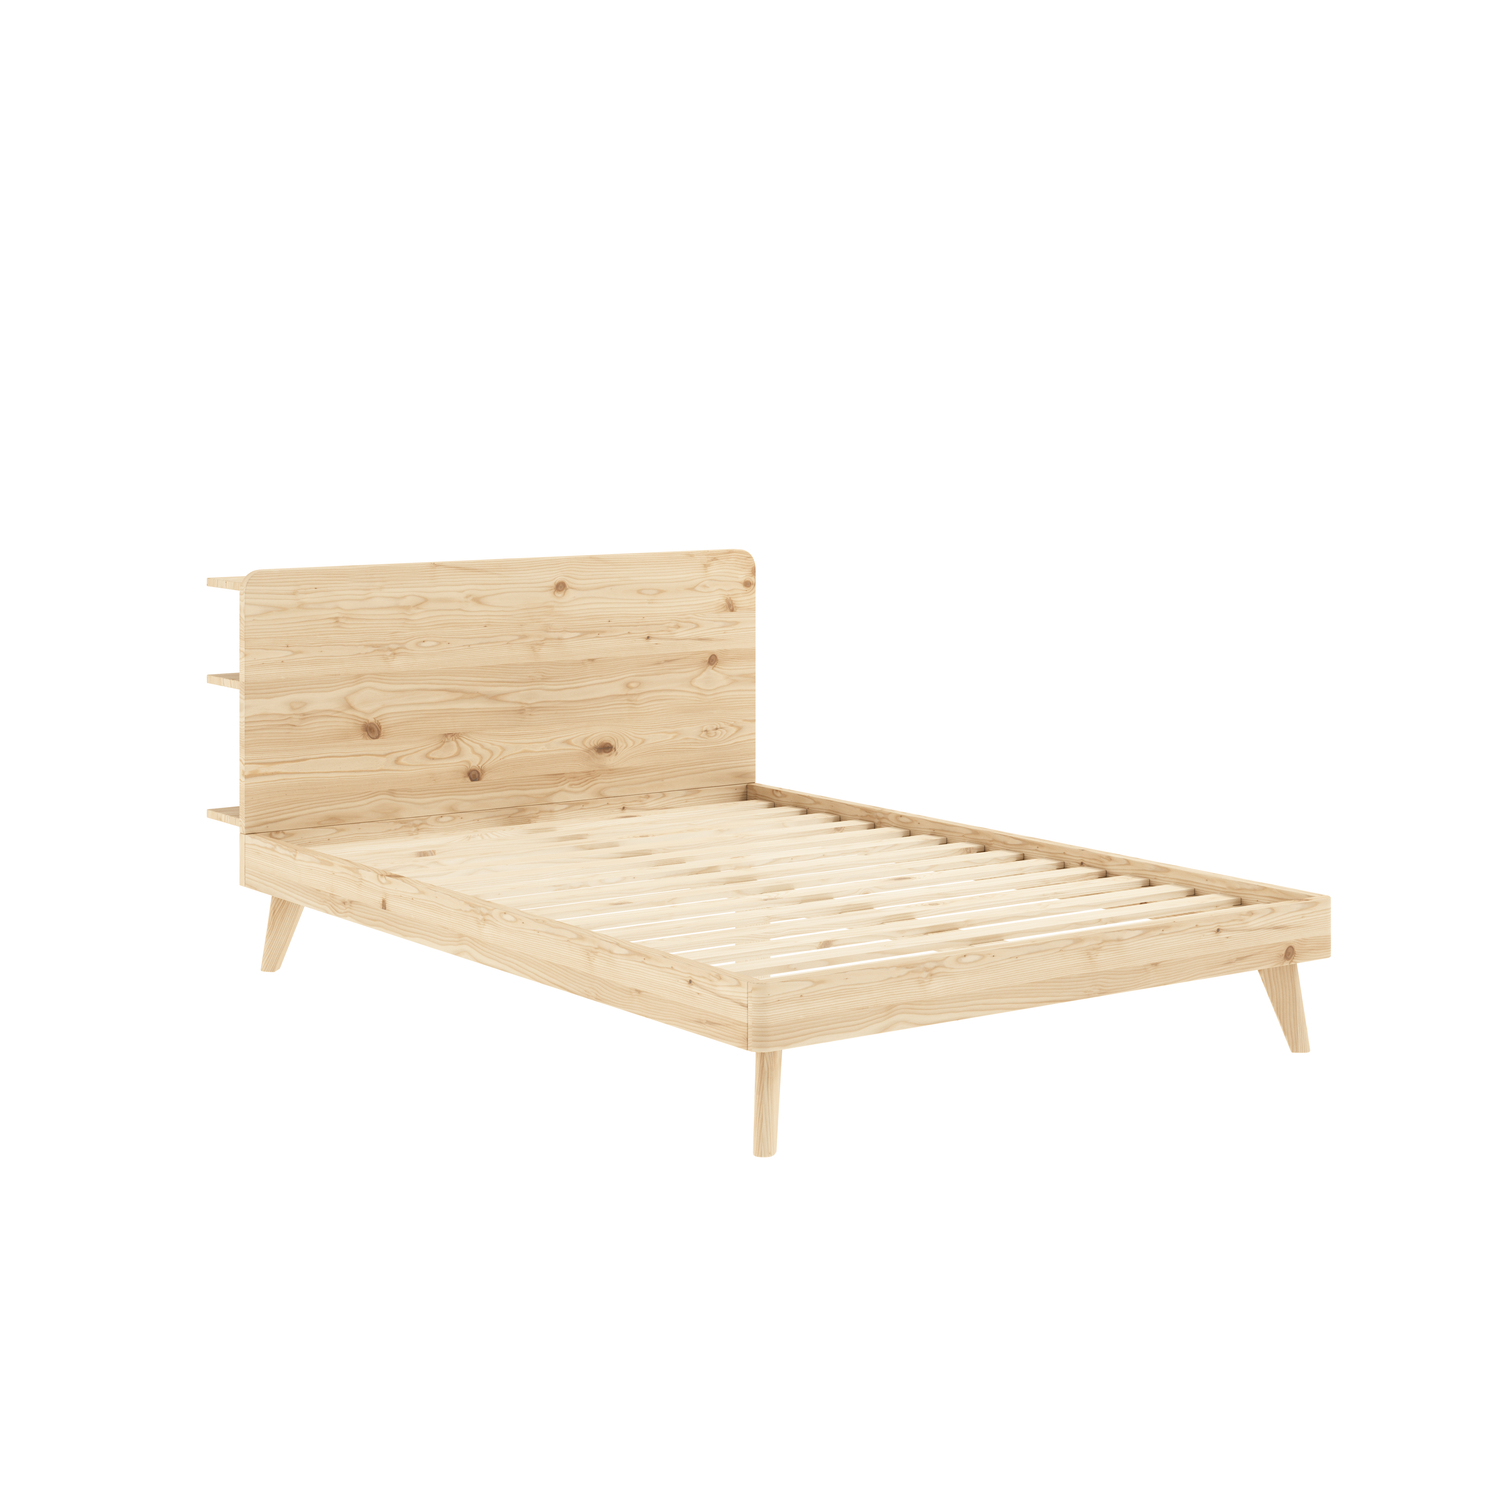 Karupdesign_retreatbed_433101140200_pine_clearlacquered_packshot